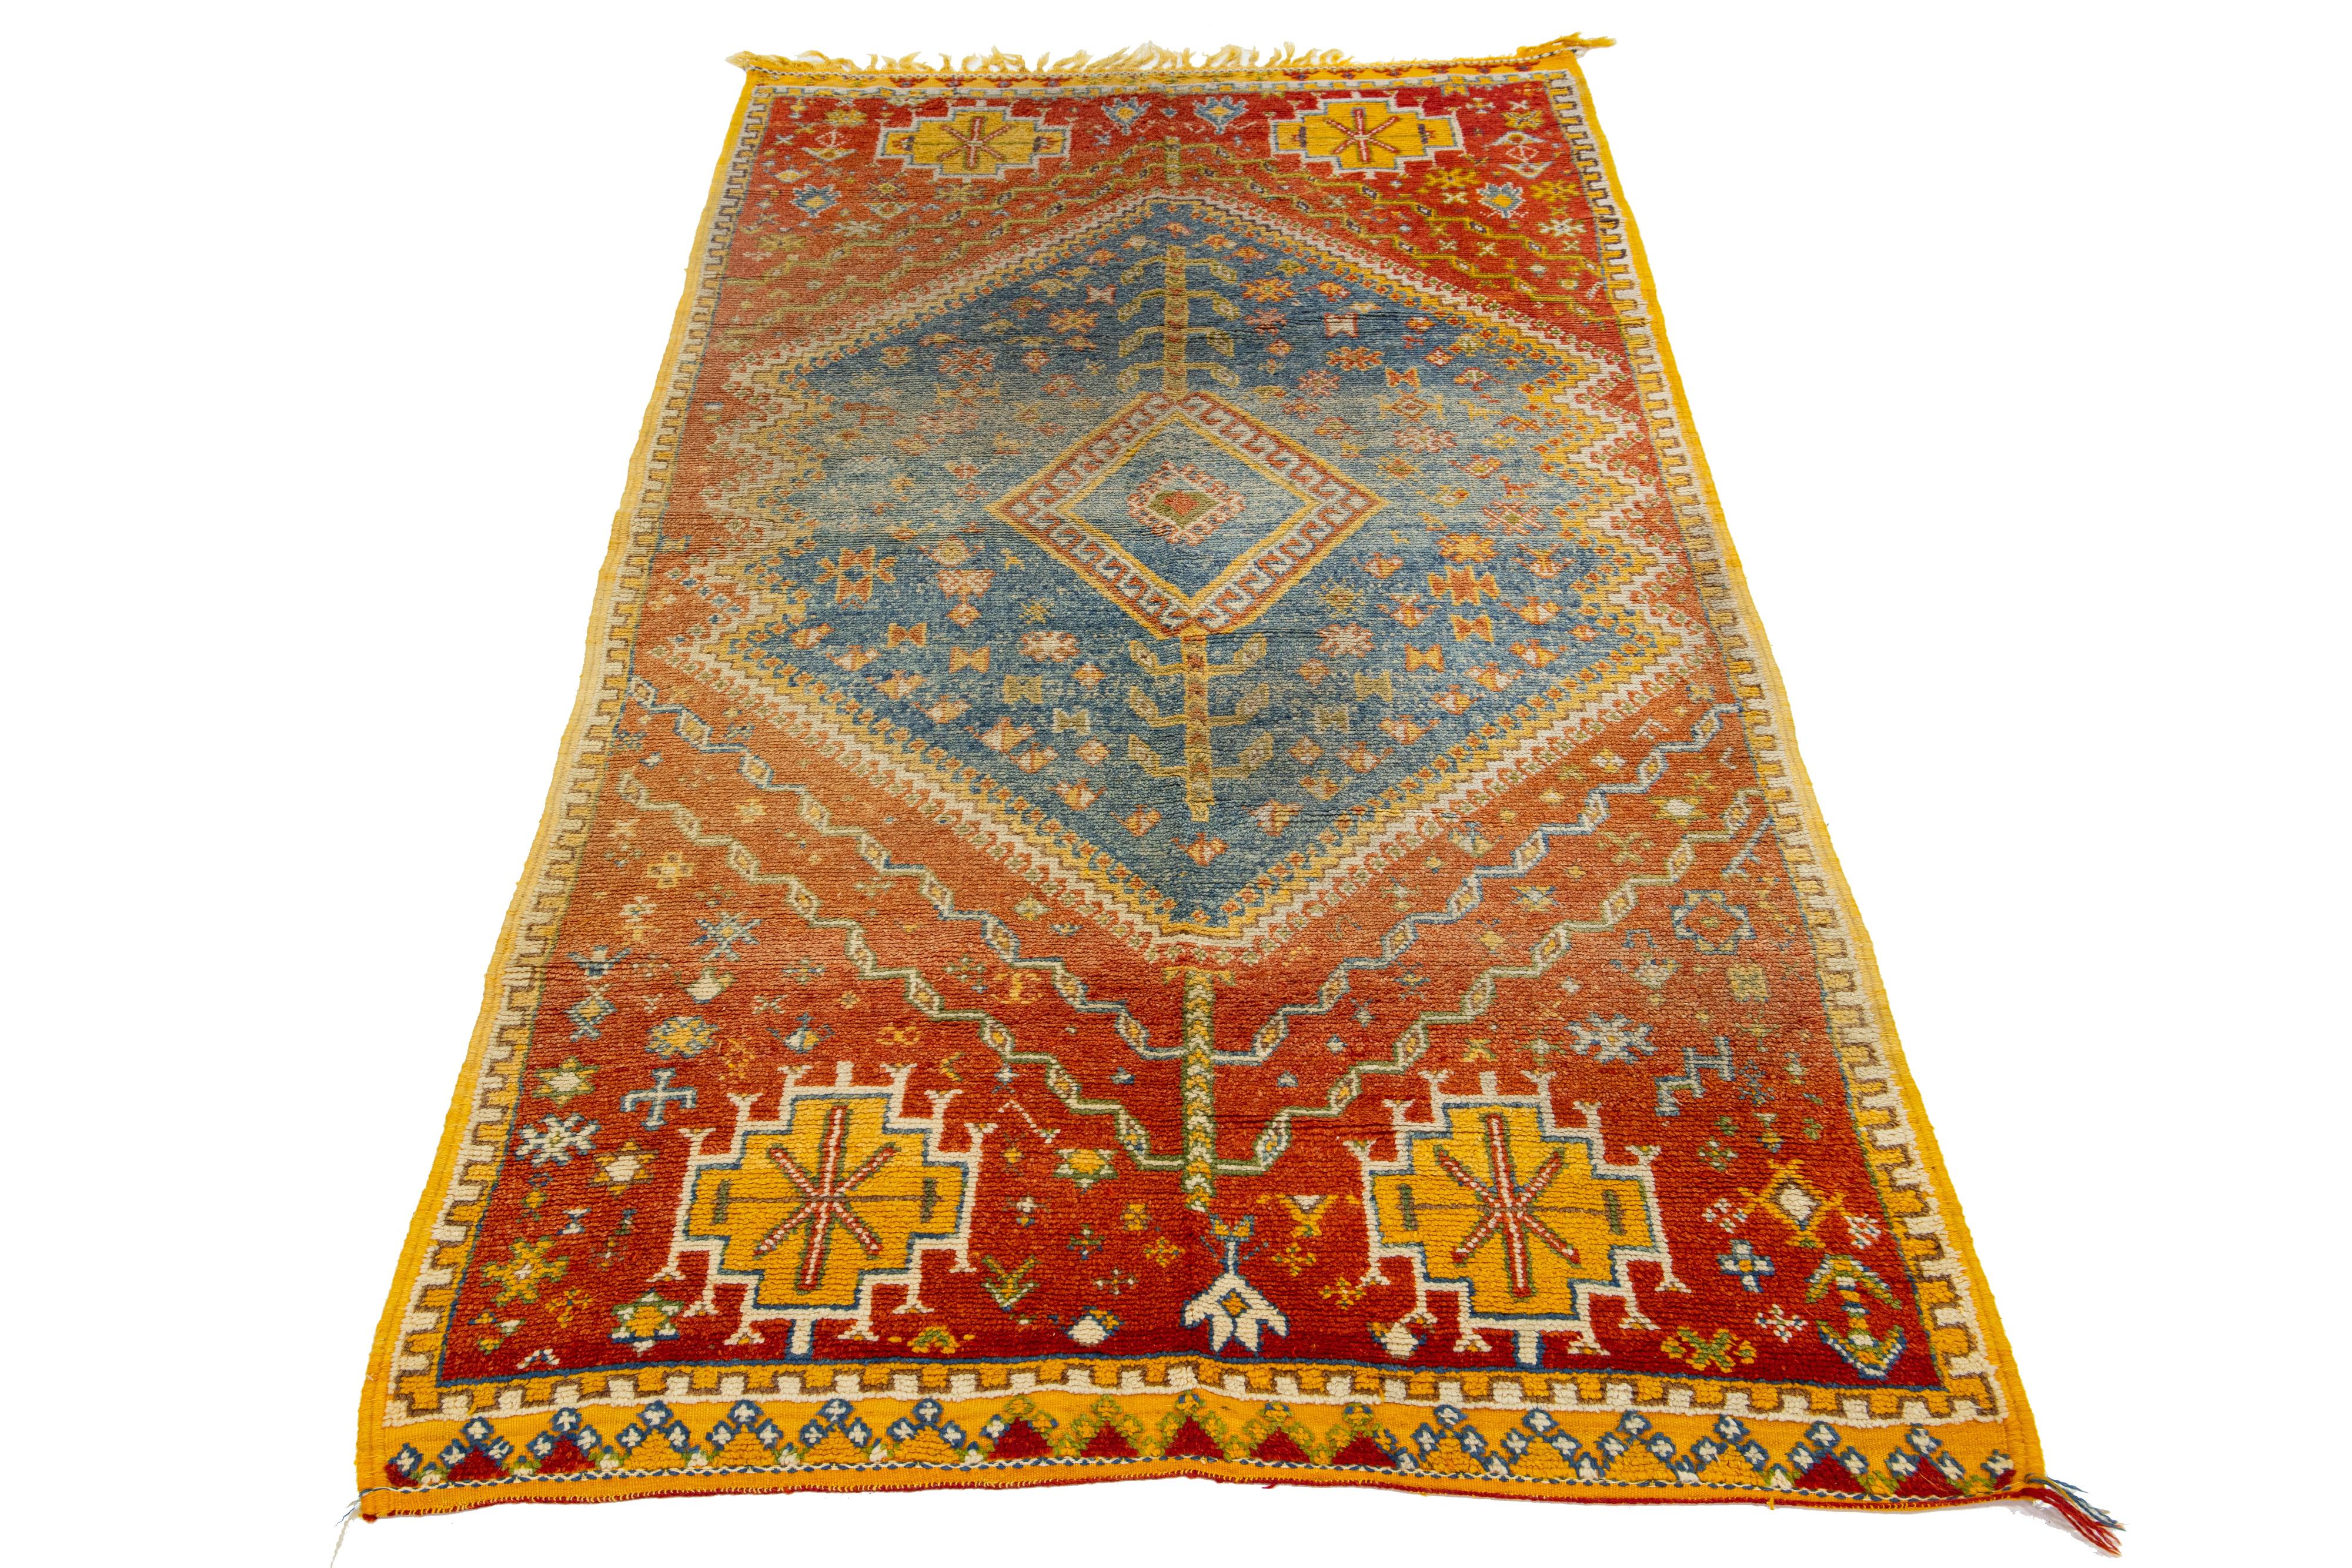 Beautiful Antique hand-knotted Persian Moroccan Handmade Orange Wool Rug with a geometrical medallion motif. This piece has fine details, great colors, and a beautiful design.

This rug measures 4'7